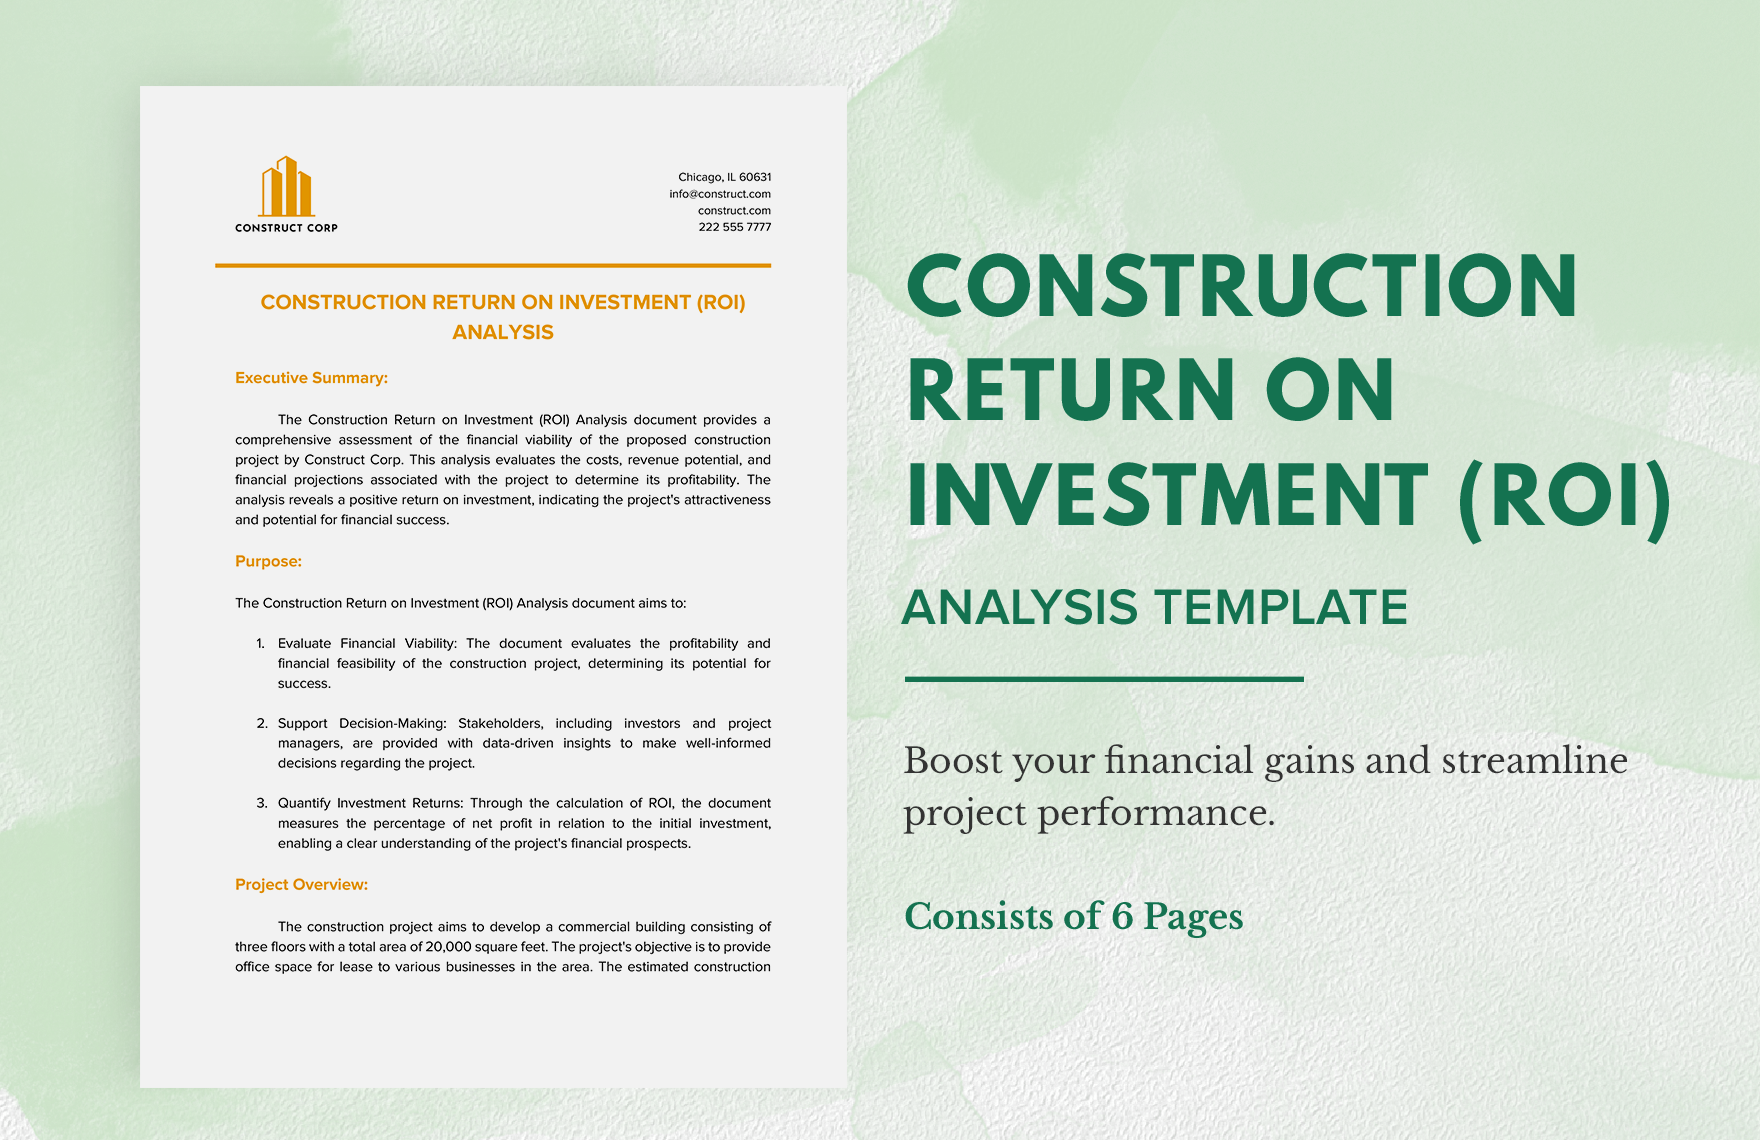 Construction Return on Investment (ROI) Analysis Template